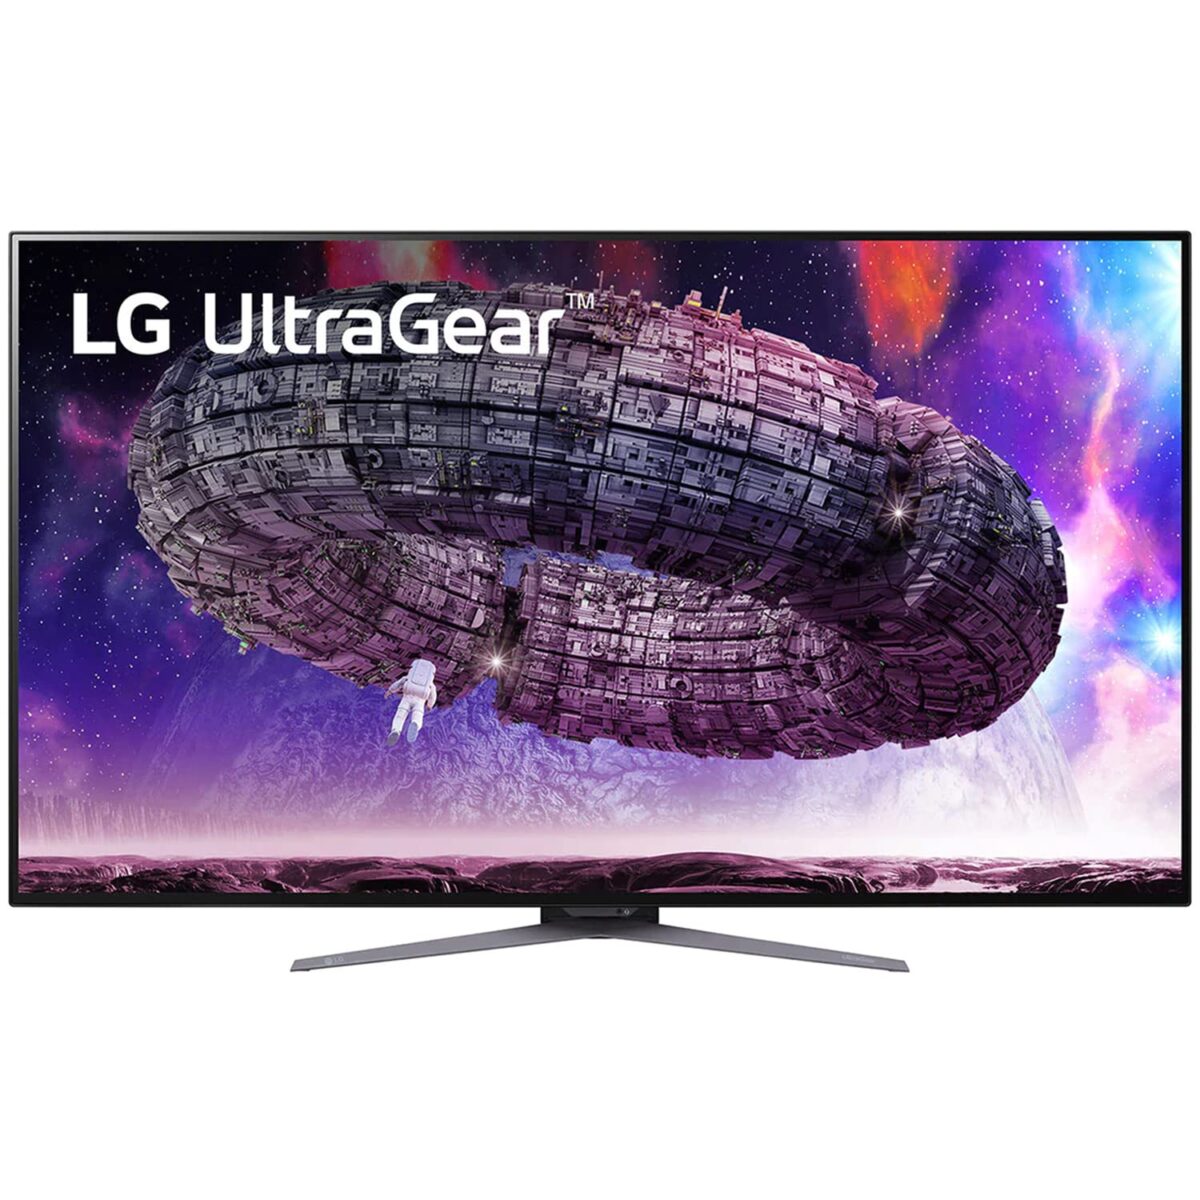 LG UltraGear 48GQ900-B 48-inch UHD 4K OLED Gaming Monitor Launched in India ( 120hz, HDR 10, O.1ms )